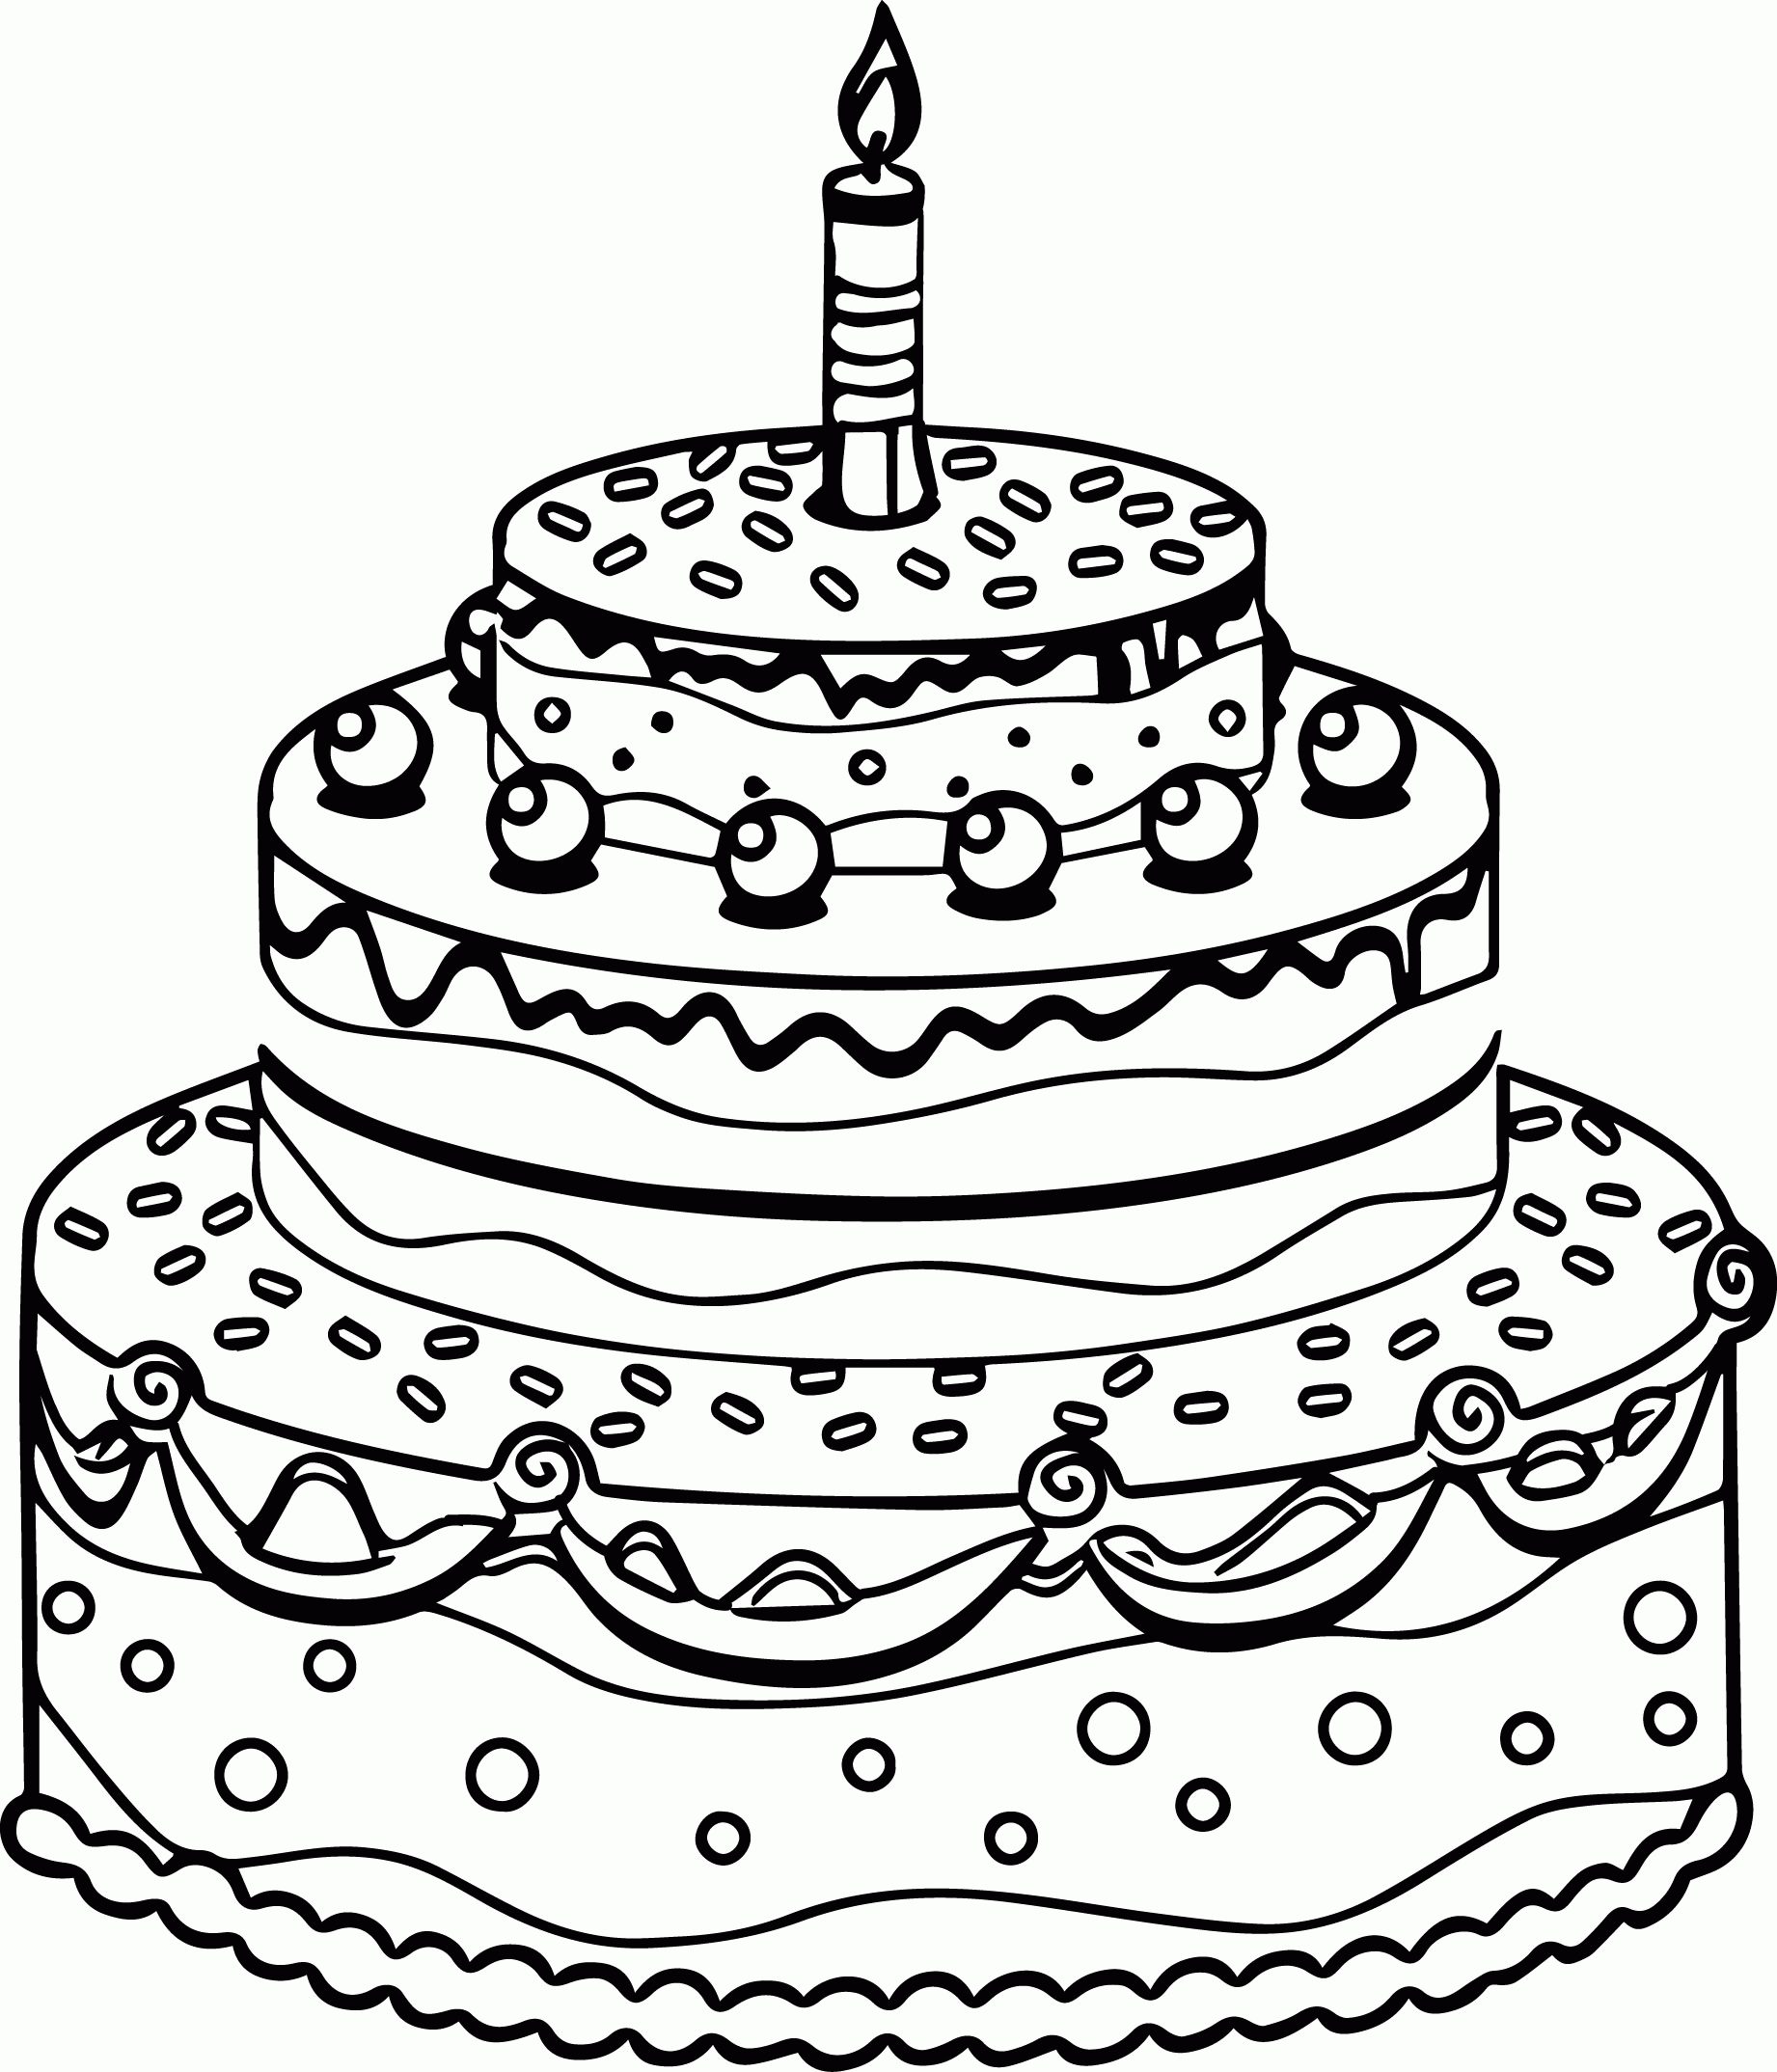 Birthday Cake Coloring Page 05 | Wecoloringpage